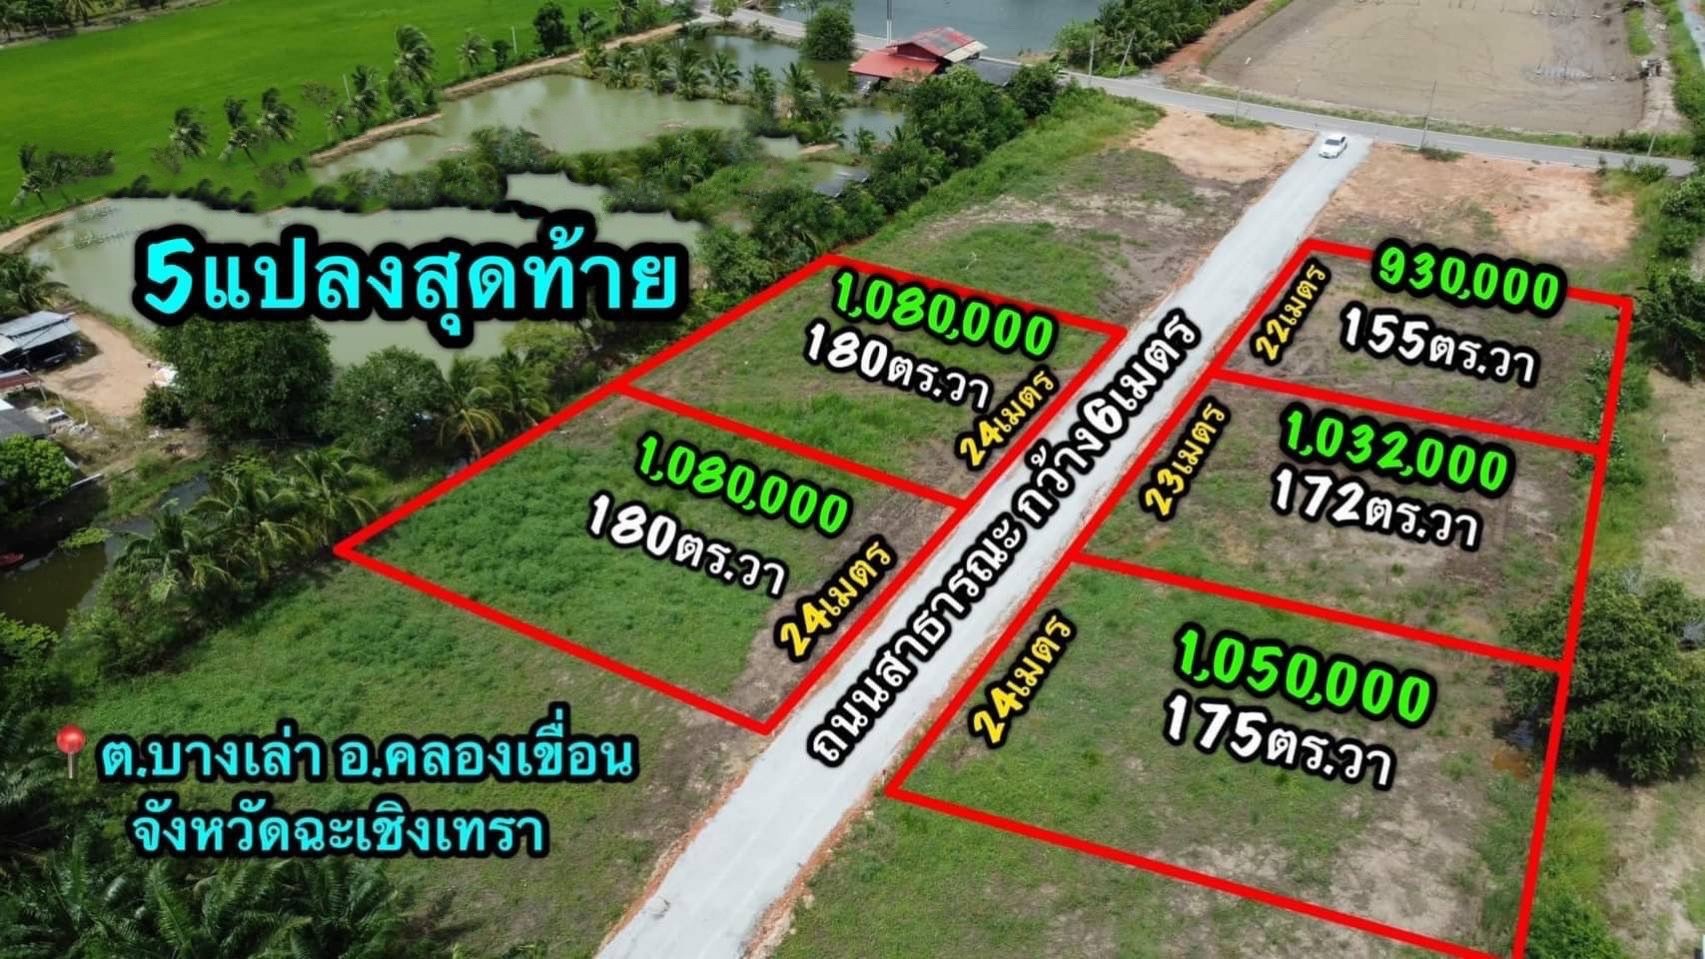 Urgent sale! Land has been allocated and filled, divided into 5 plots for sale, total area 2 rai 62 sq m, Bang Lao Subdistrict, Chachoengsao Province, there is a public road cutting through every plot, close to Bangkok, no water flooding, suitable for mak